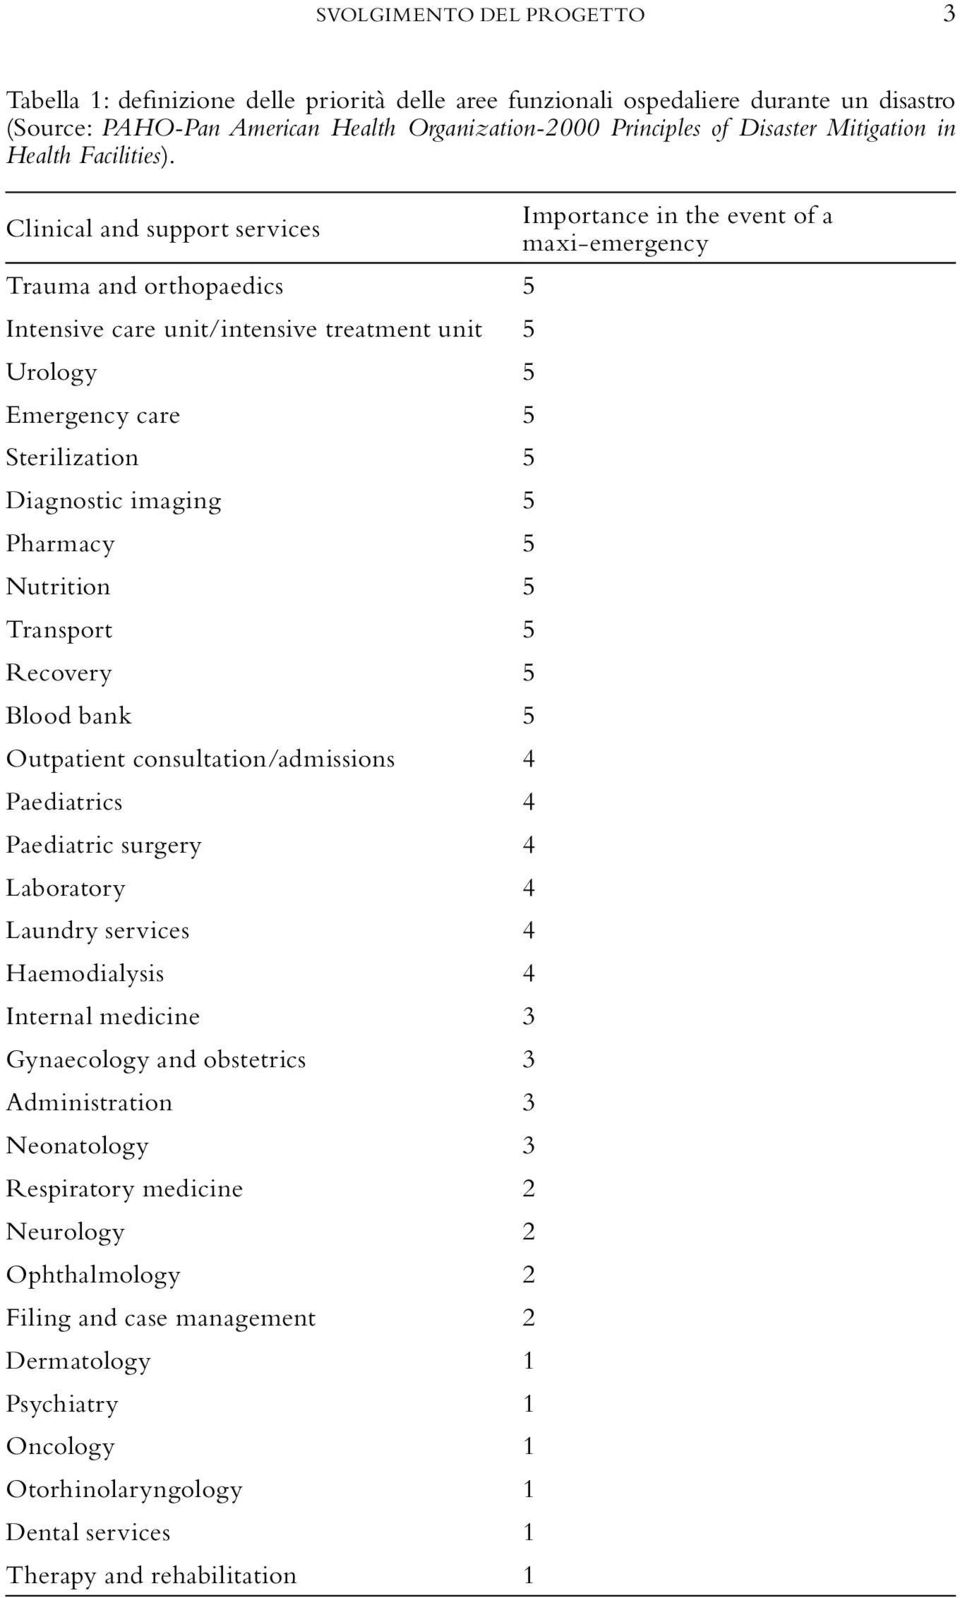 Clinical and support services Importance in the event of a mai-emergency Trauma and orthopaedics 5 Intensive care unit/intensive treatment unit 5 Urology 5 Emergency care 5 Sterilization 5 Diagnostic